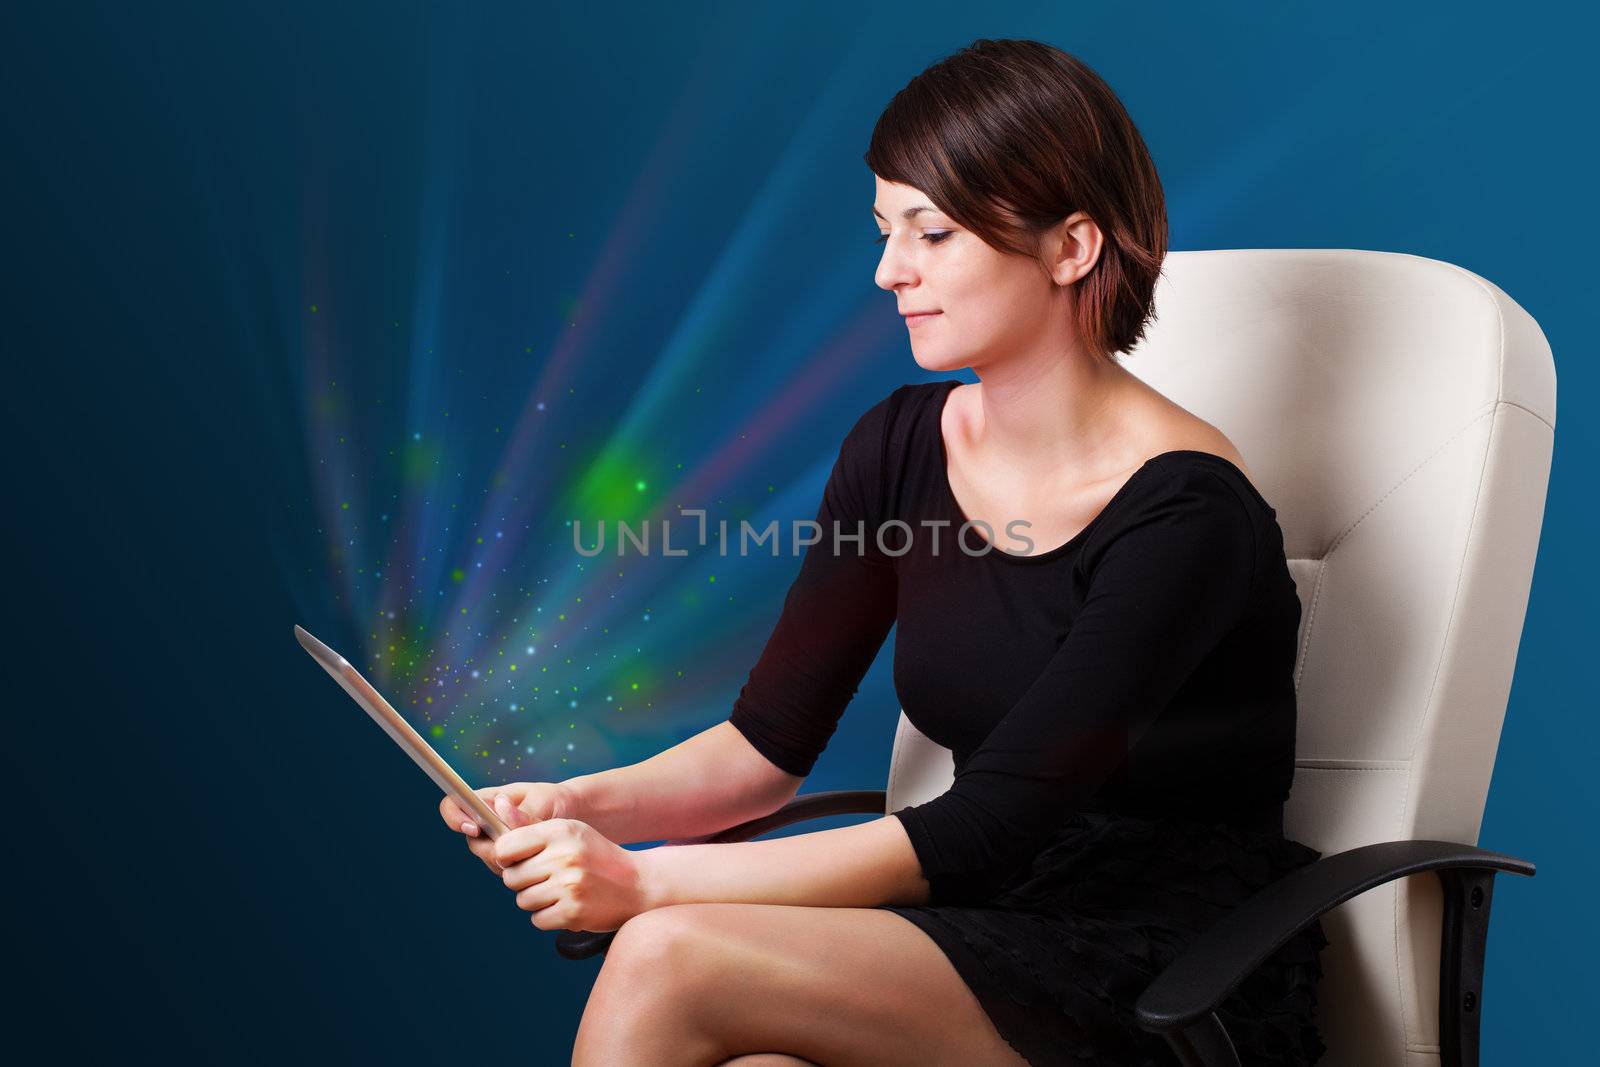 Young business woman looking at modern tablet with abstract lights 